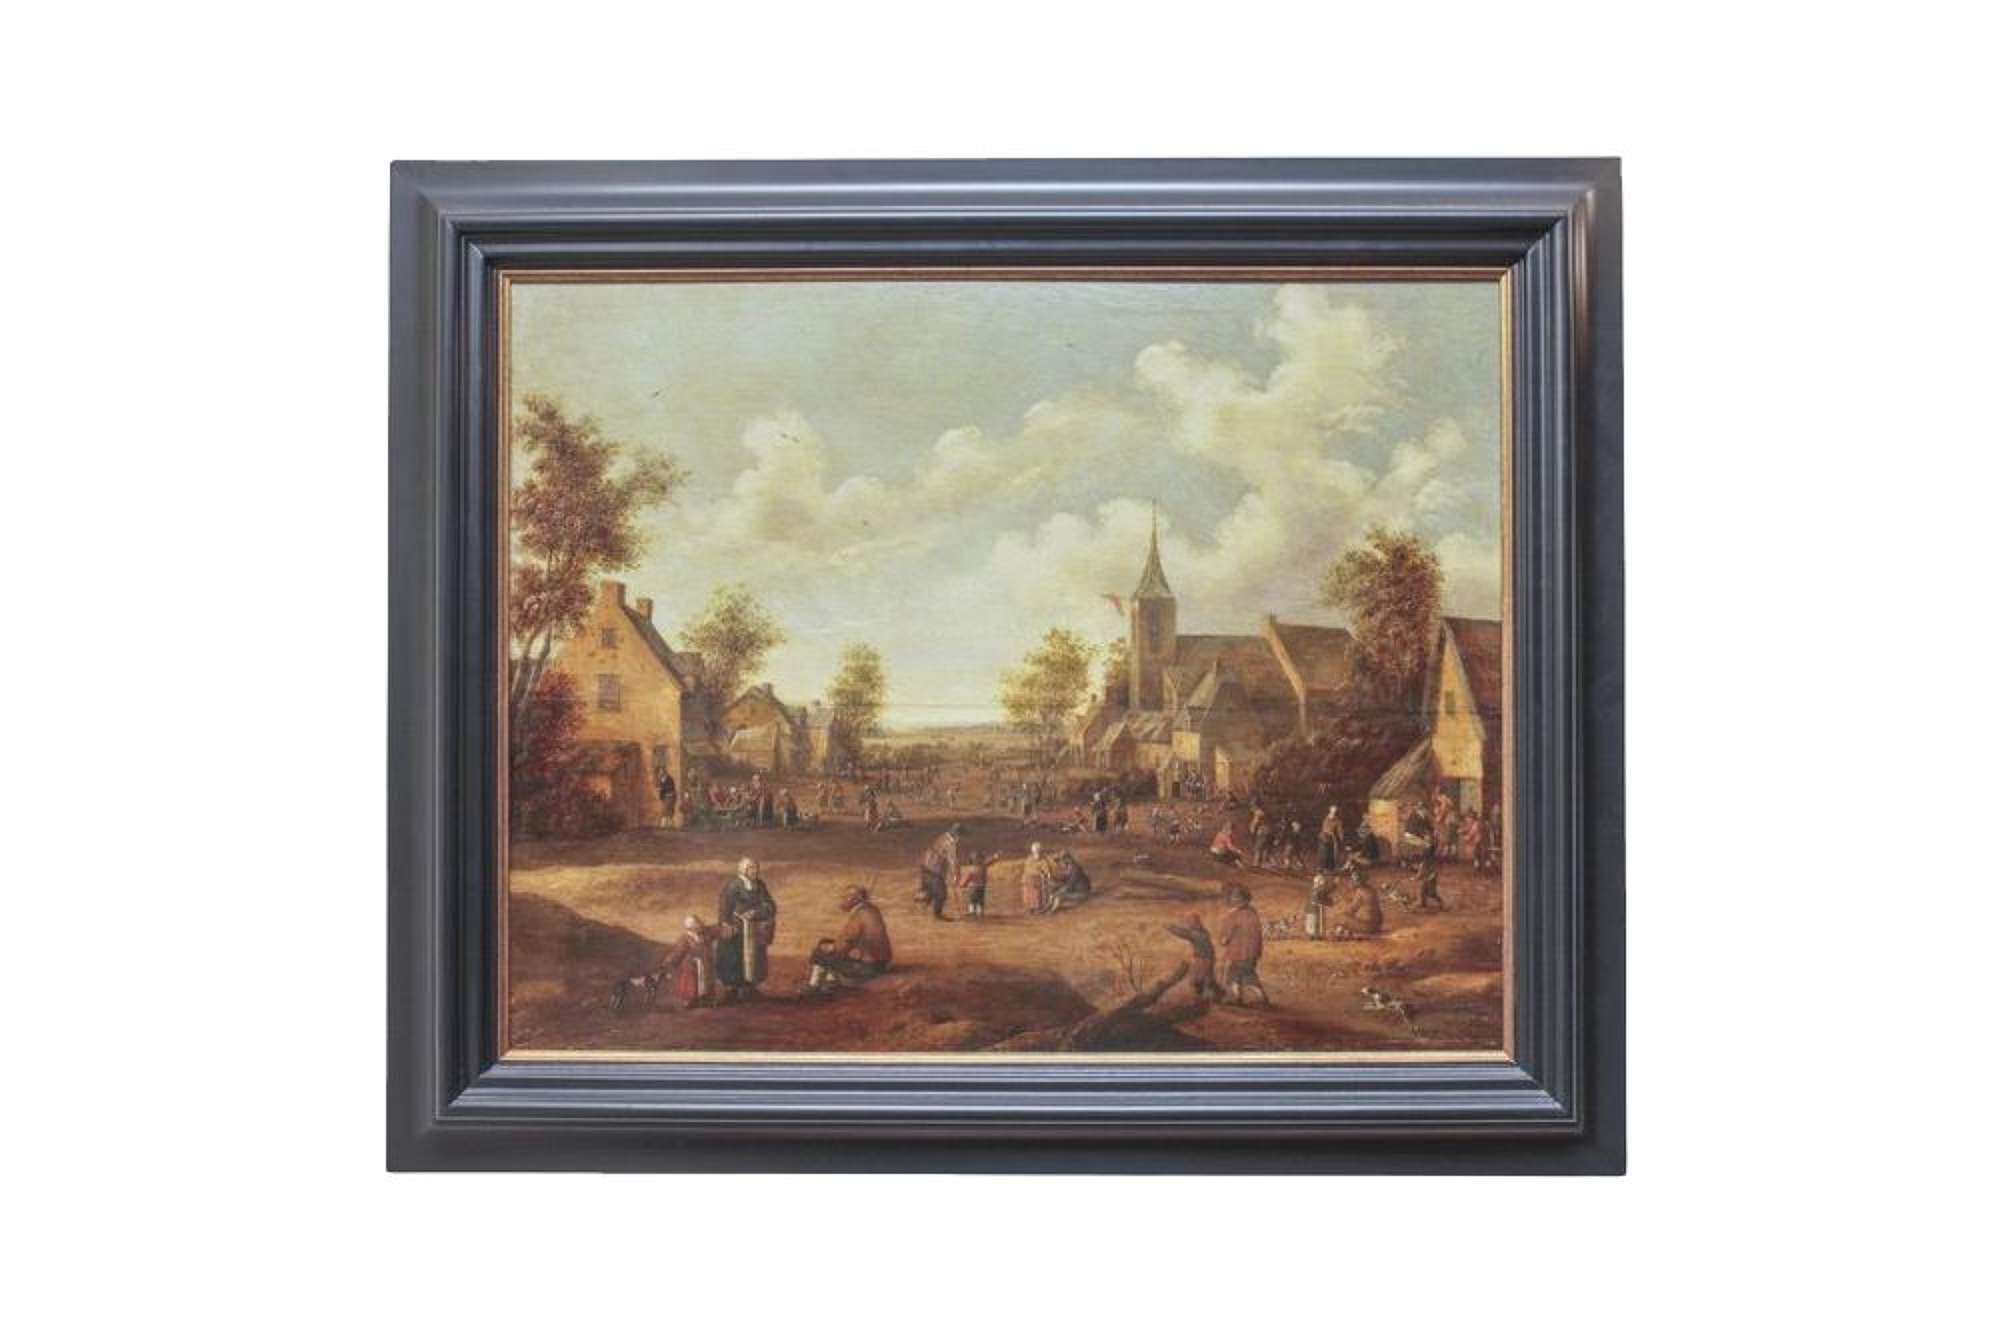 After Cornelis Drochsloth, Peasant Feast Painting, Oil on Canvas, Framed